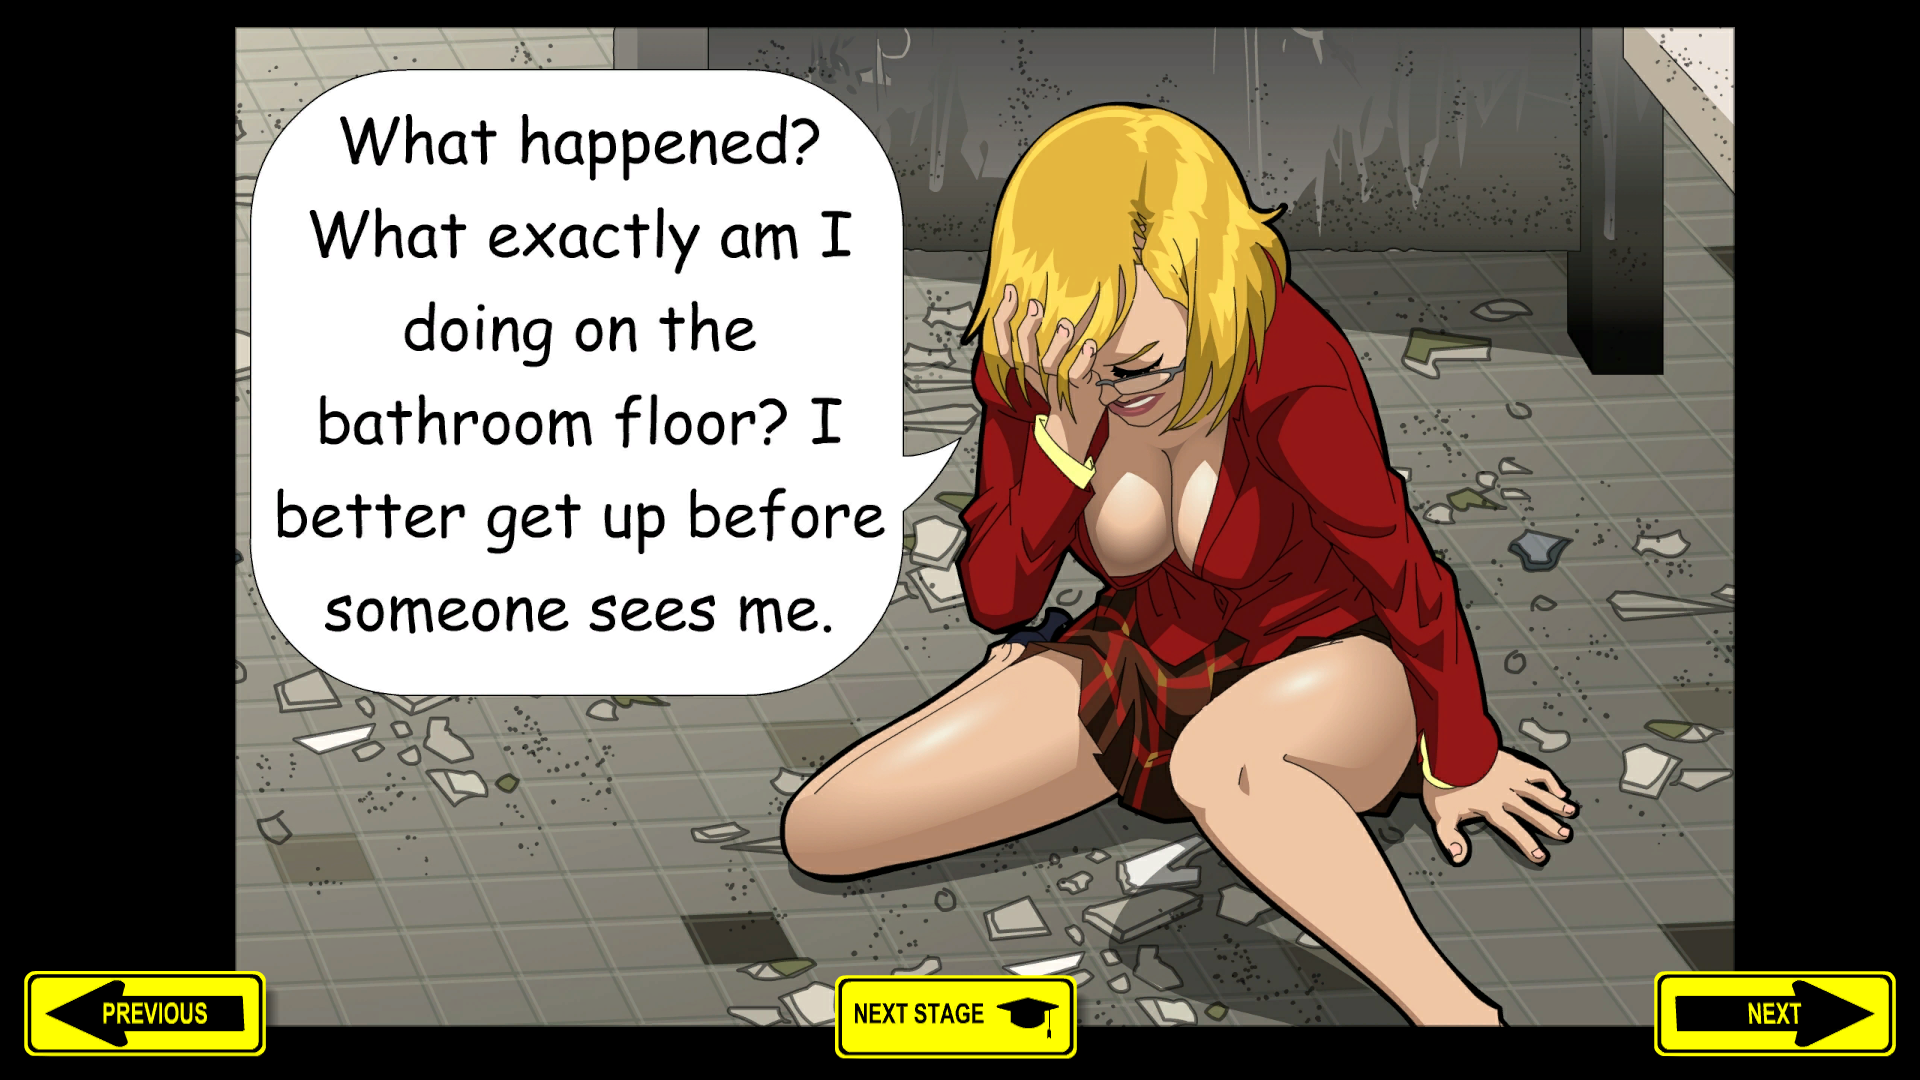 Zombie Girls Porn Games - Escape From Zombie U:reloaded [DEMO] - free game download, reviews, mega -  xGames